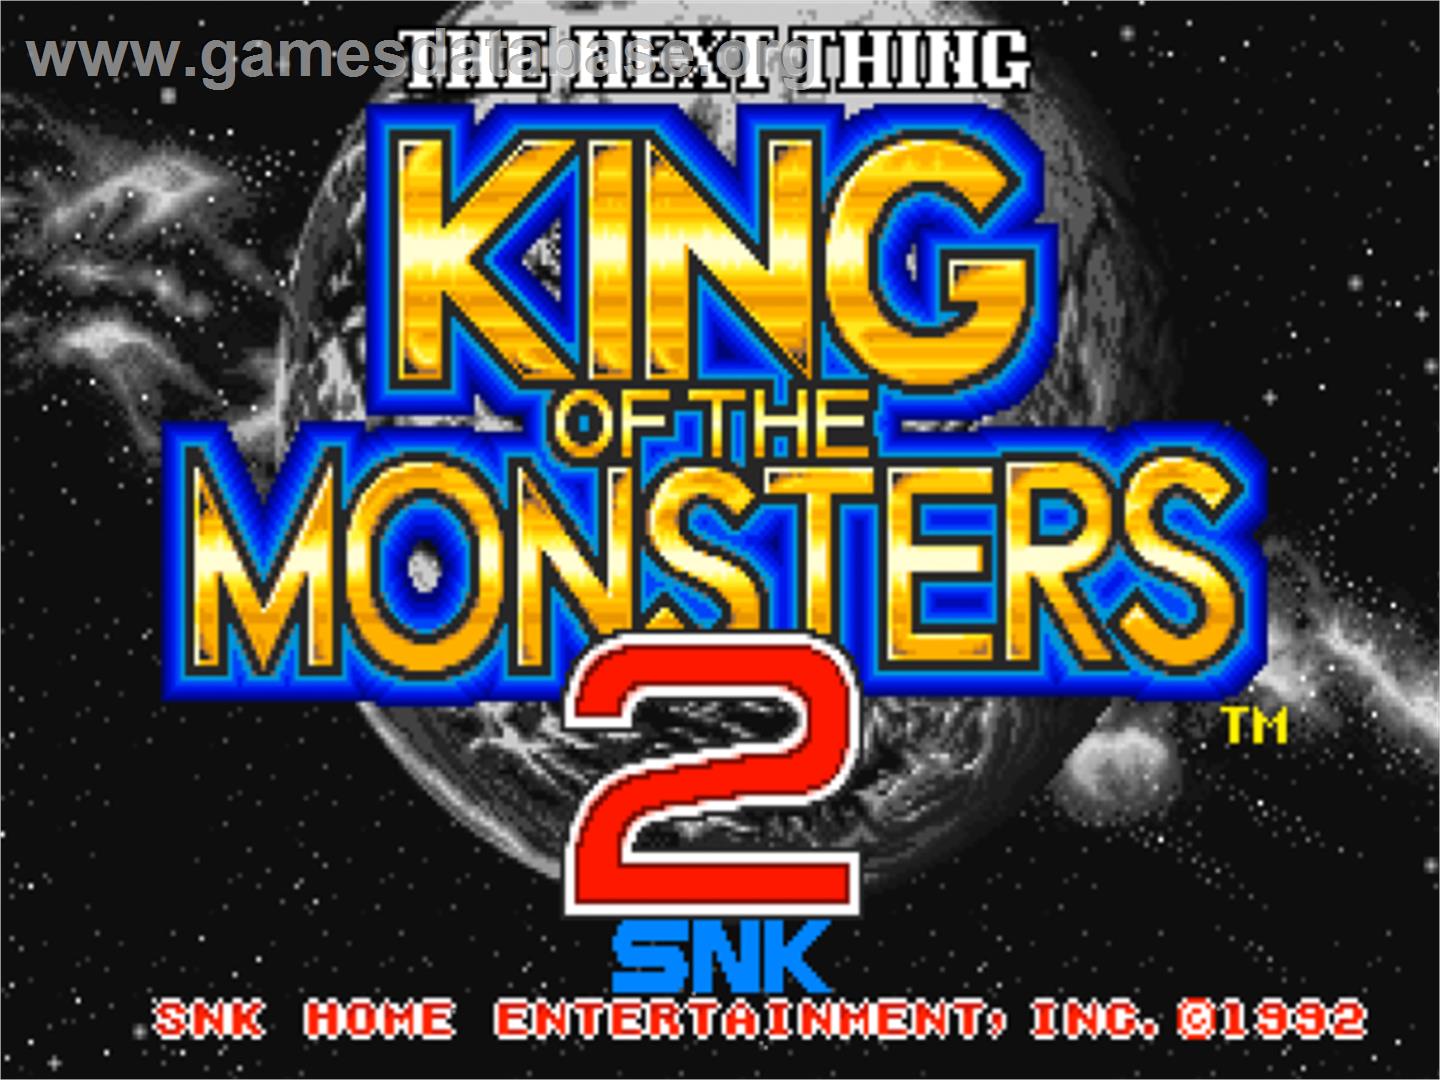 King of the Monsters 2: The Next Thing - SNK Neo-Geo CD - Artwork - Title Screen